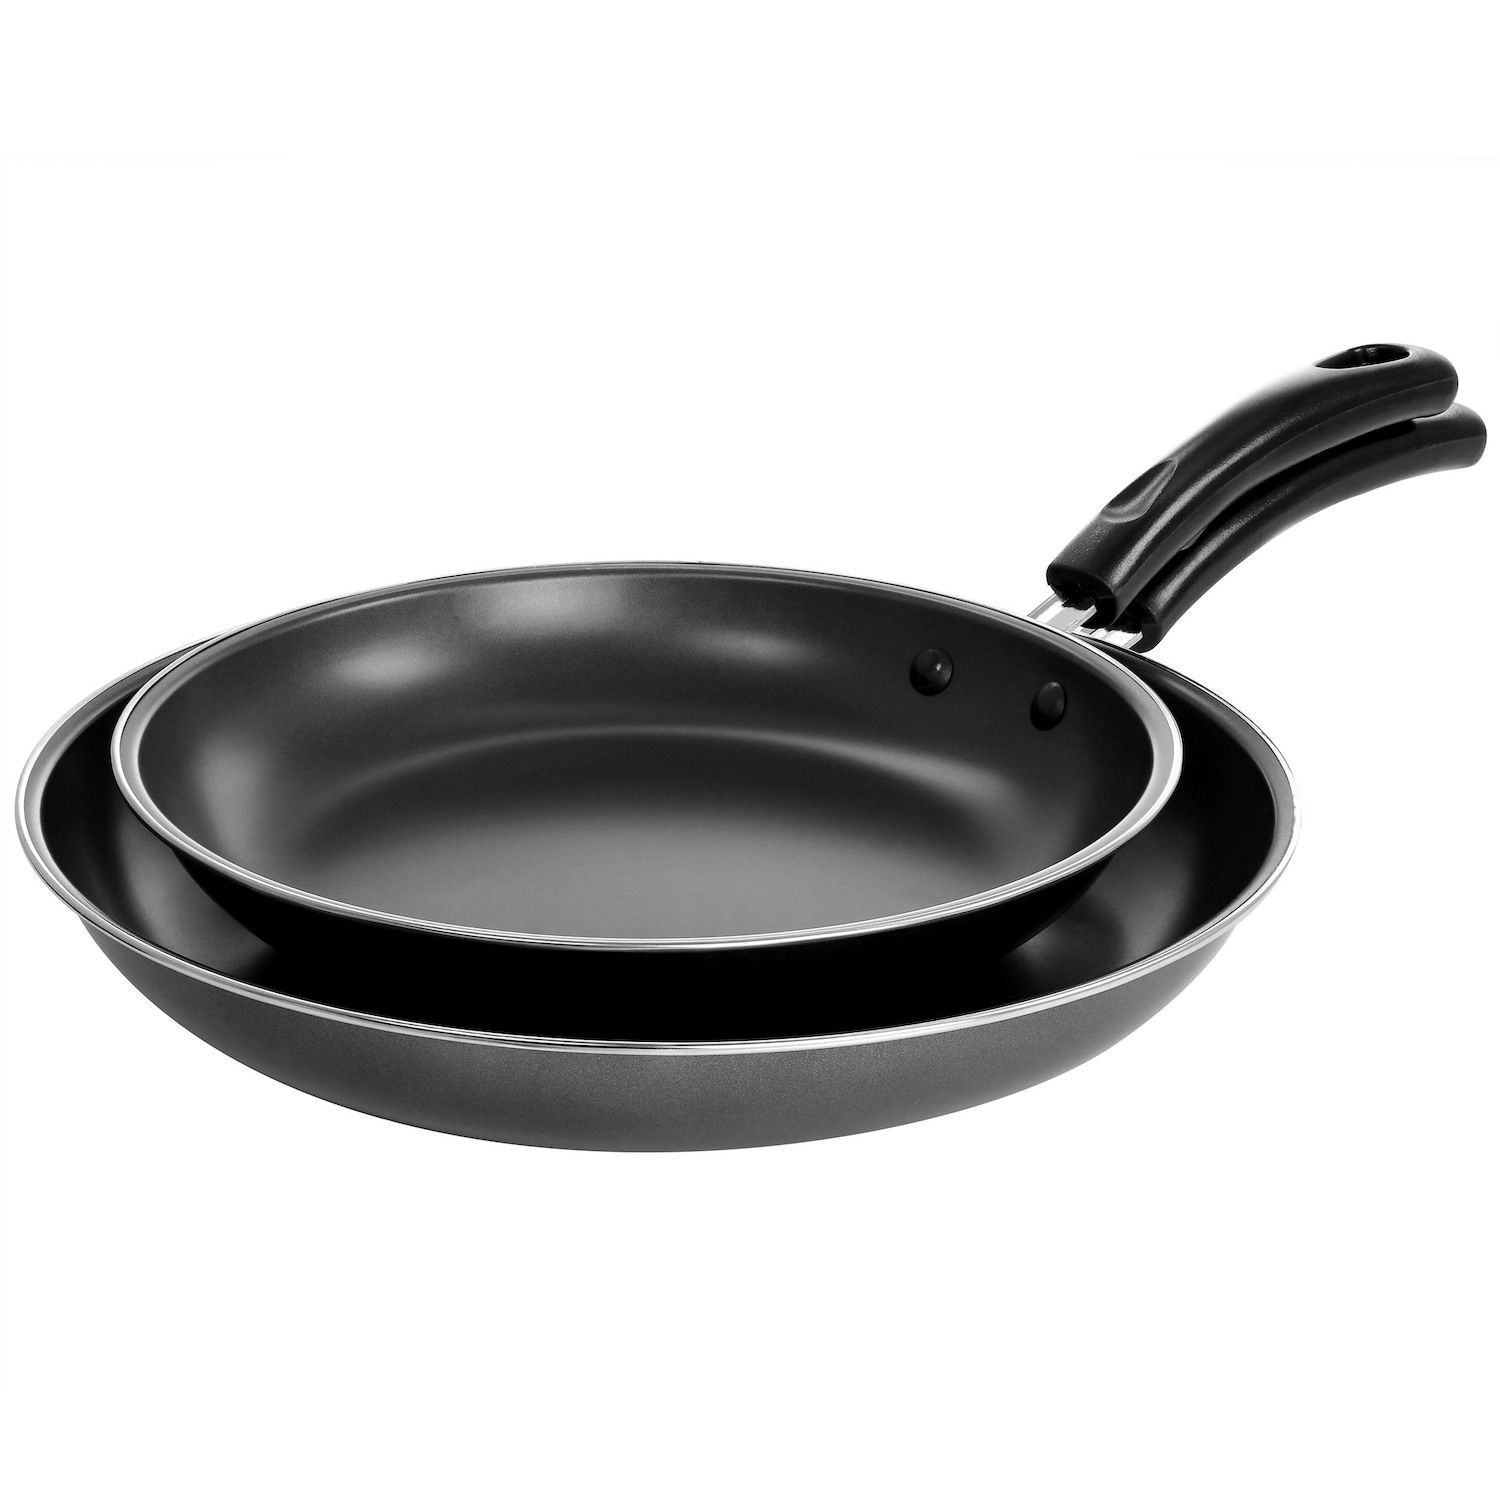 Gibson Home Rembrandt 4.7 Inch Stainless Steel Mini Frying Pan